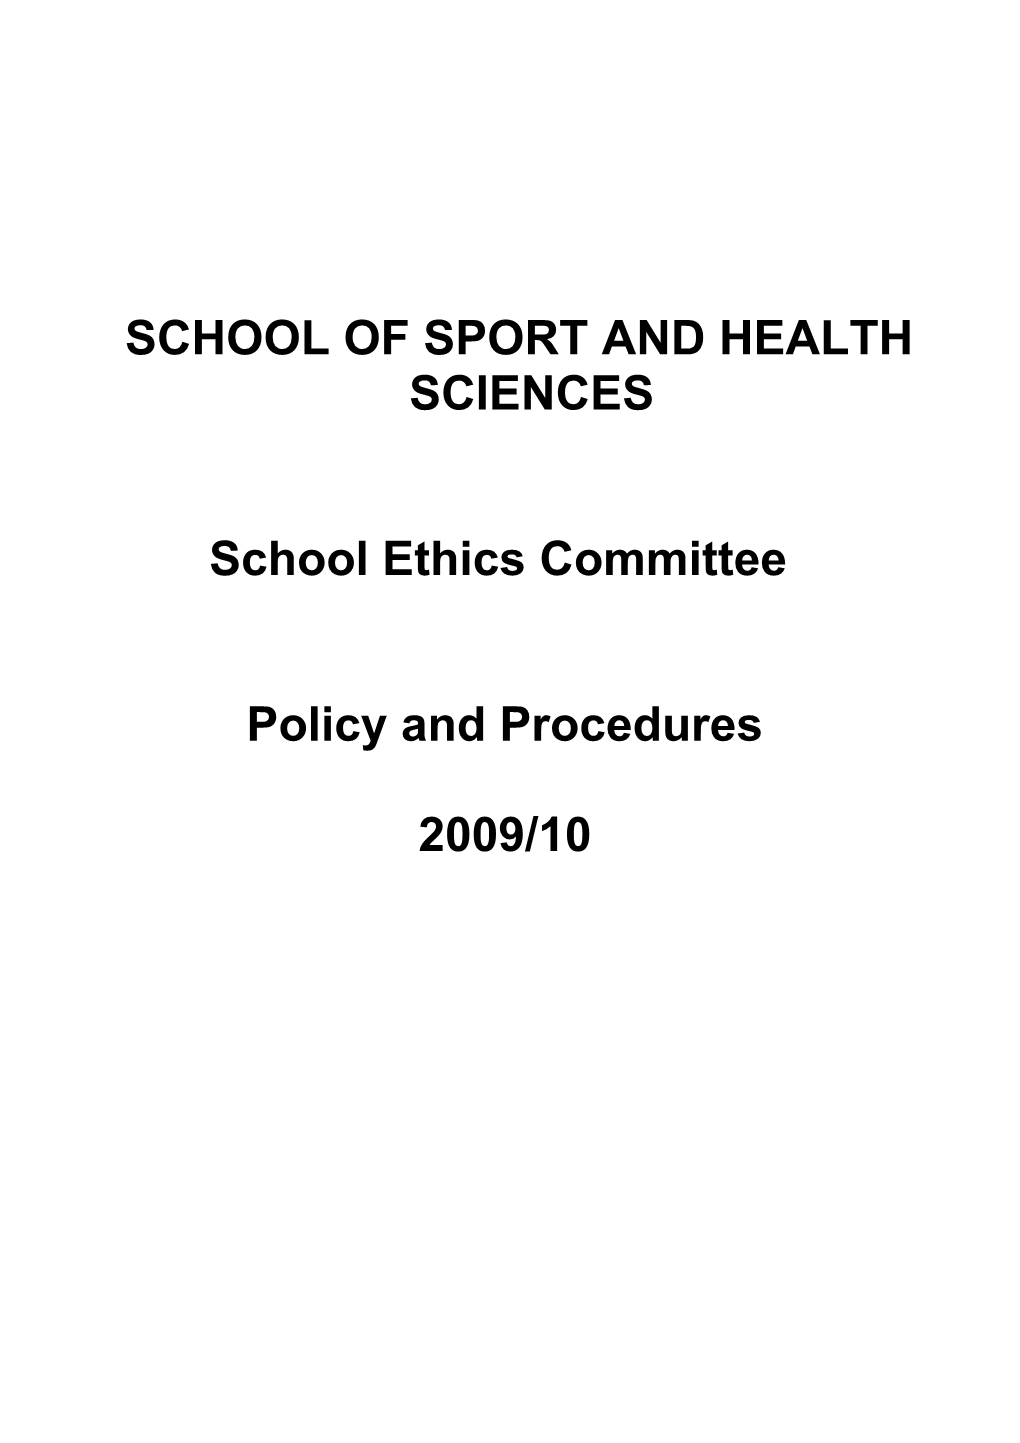 School of Sport and Health Sciences